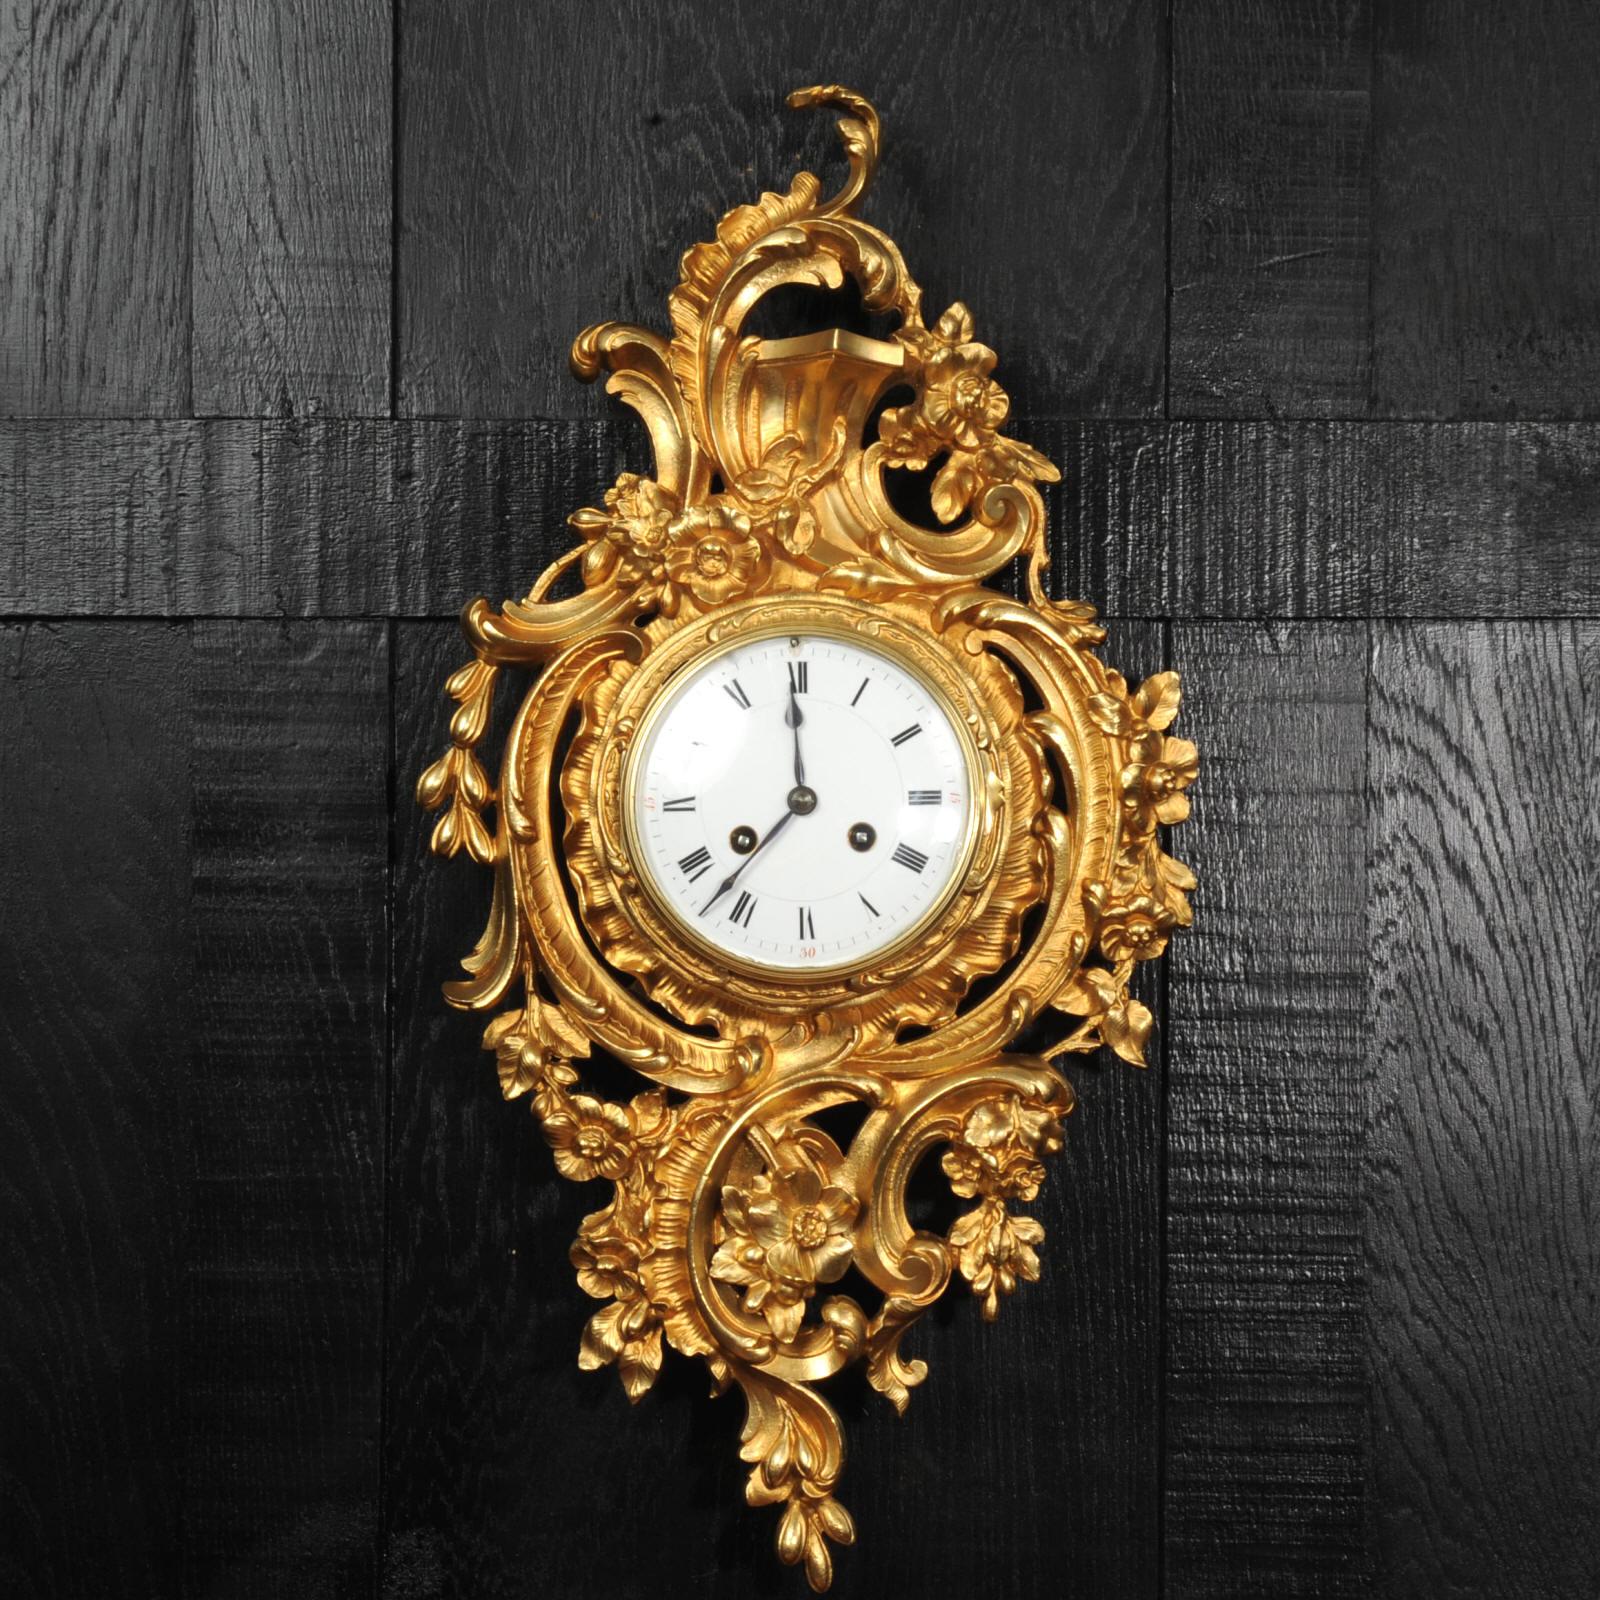 A beautiful antique French Rococo cartel wall clock, the movement by Vincenti et Cie and retailed in Paris, circa 1870. Beautifully modelled asymmetric case of 'C' scrolls, profusely decorated with garlands of flowers. A glimpse of the pendulum can